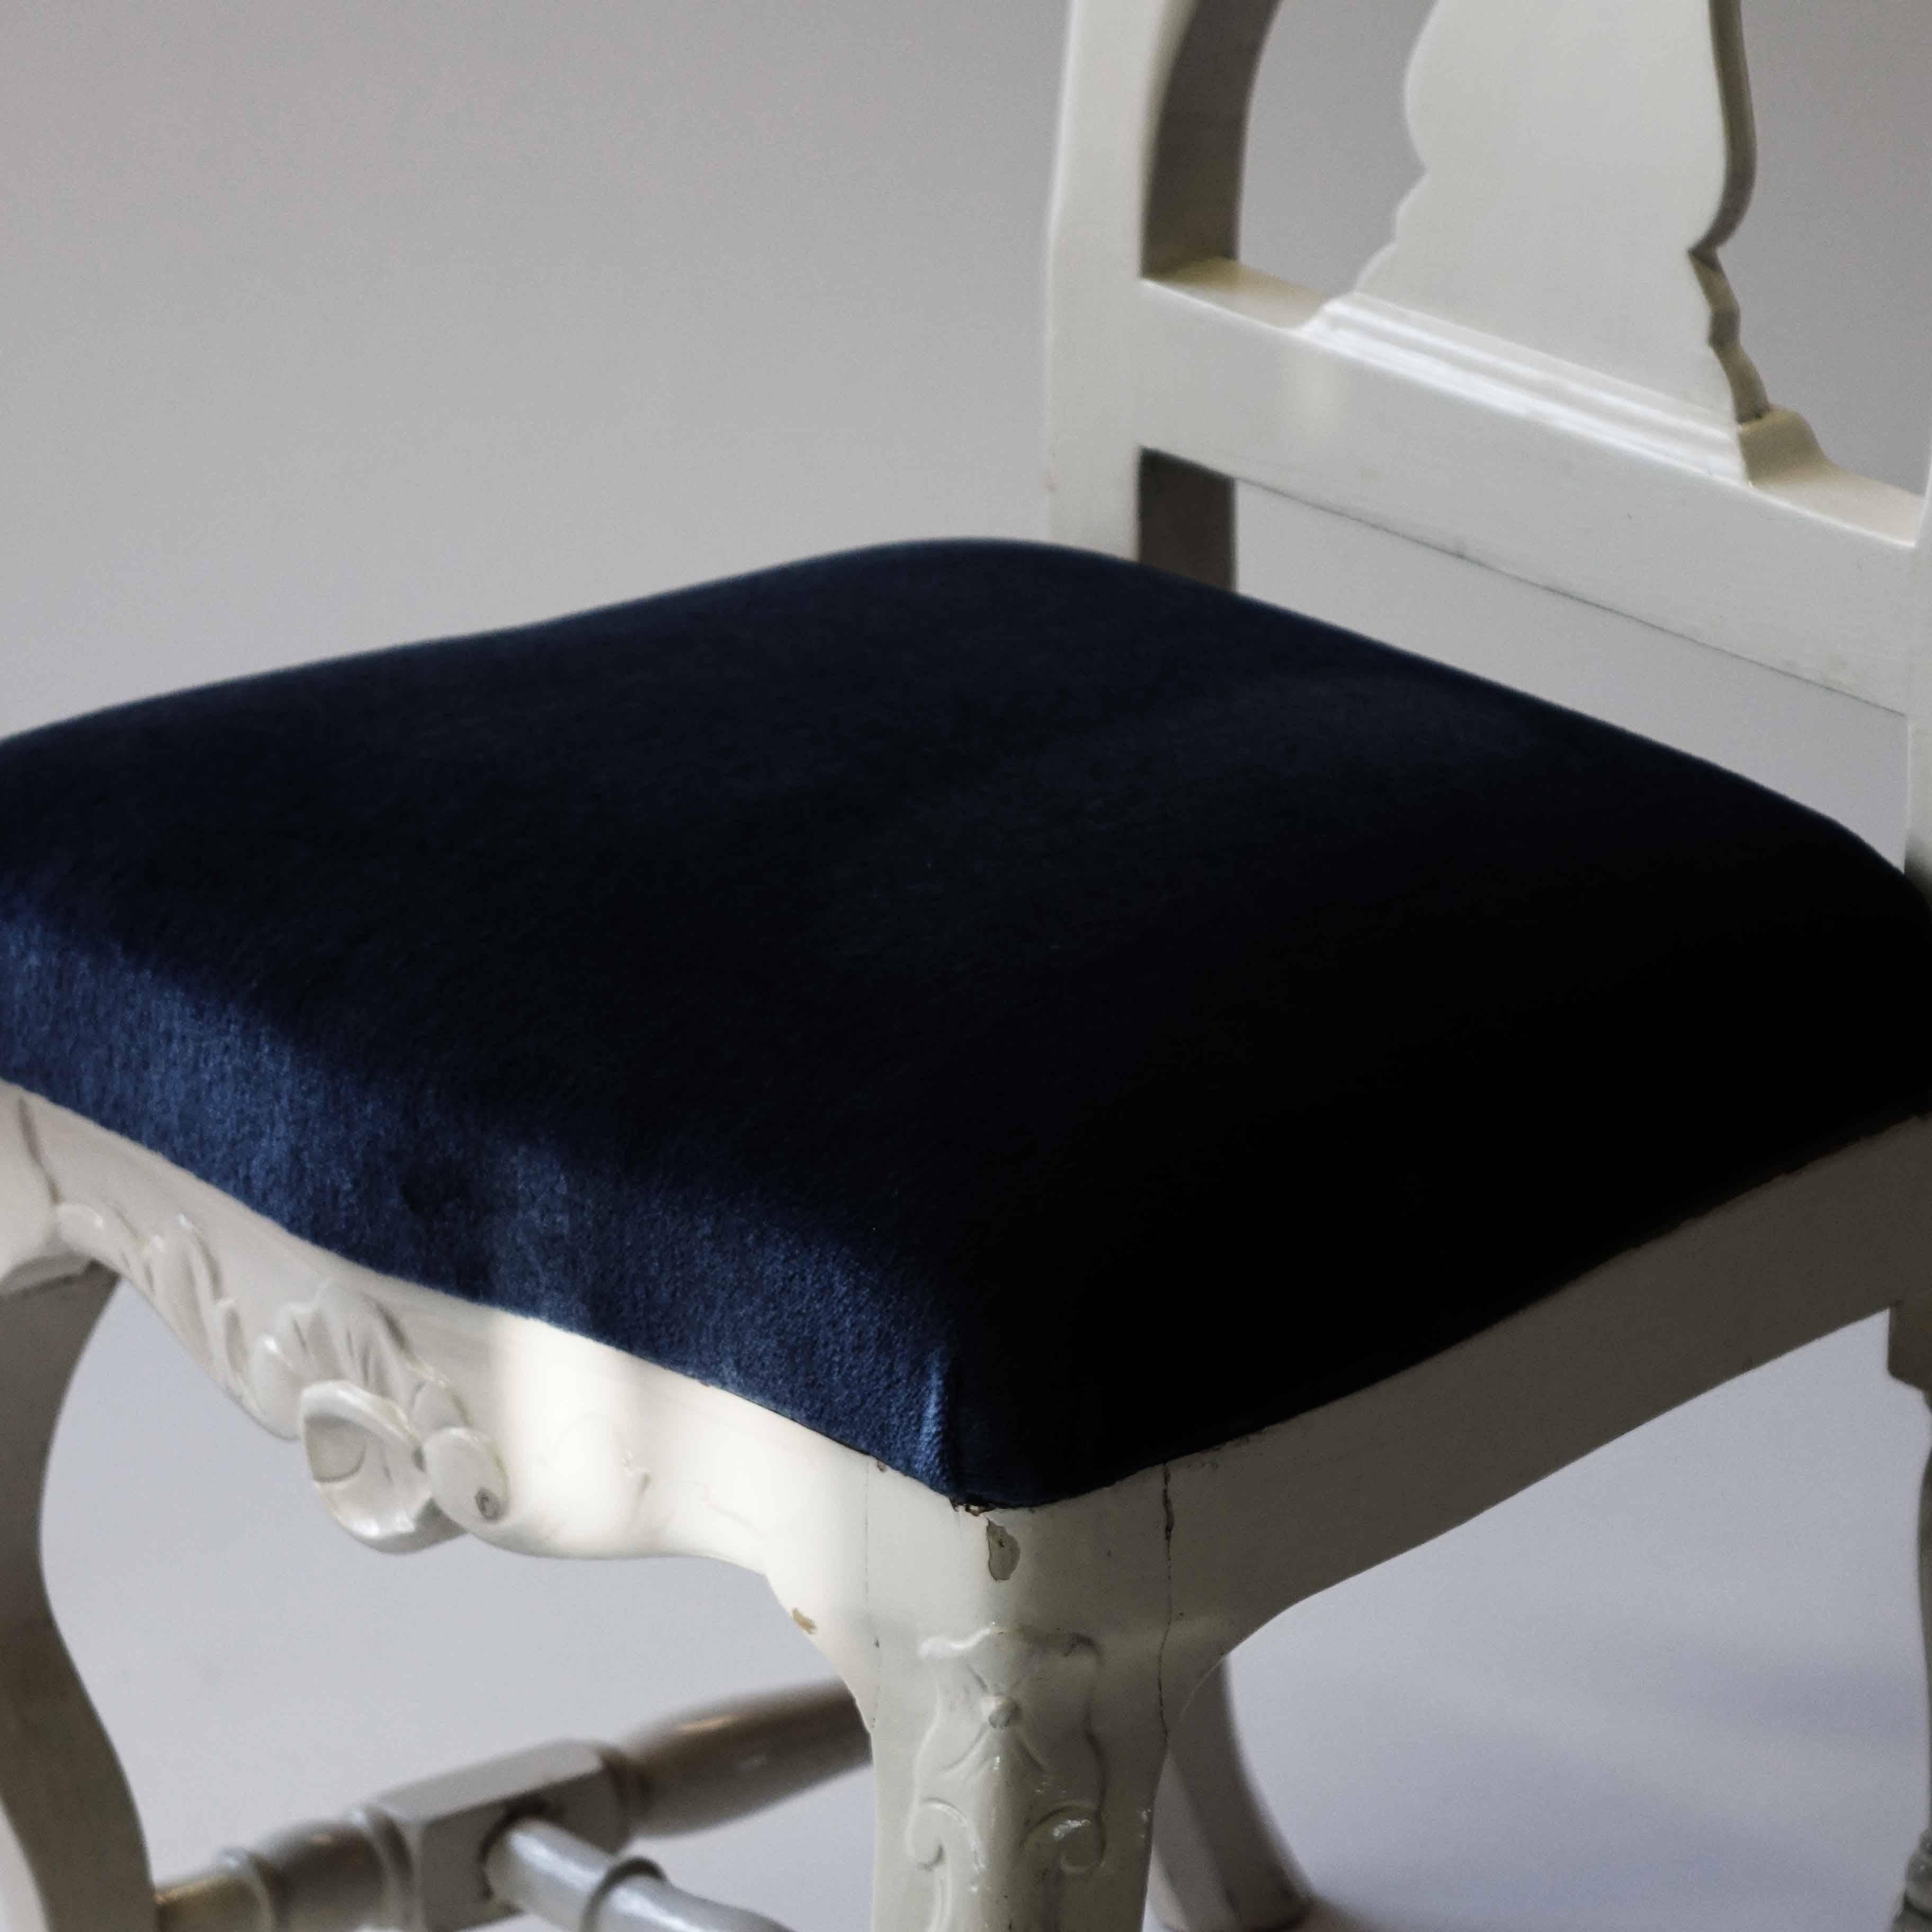 White painted chairs with blue velvet seats in a set of four.